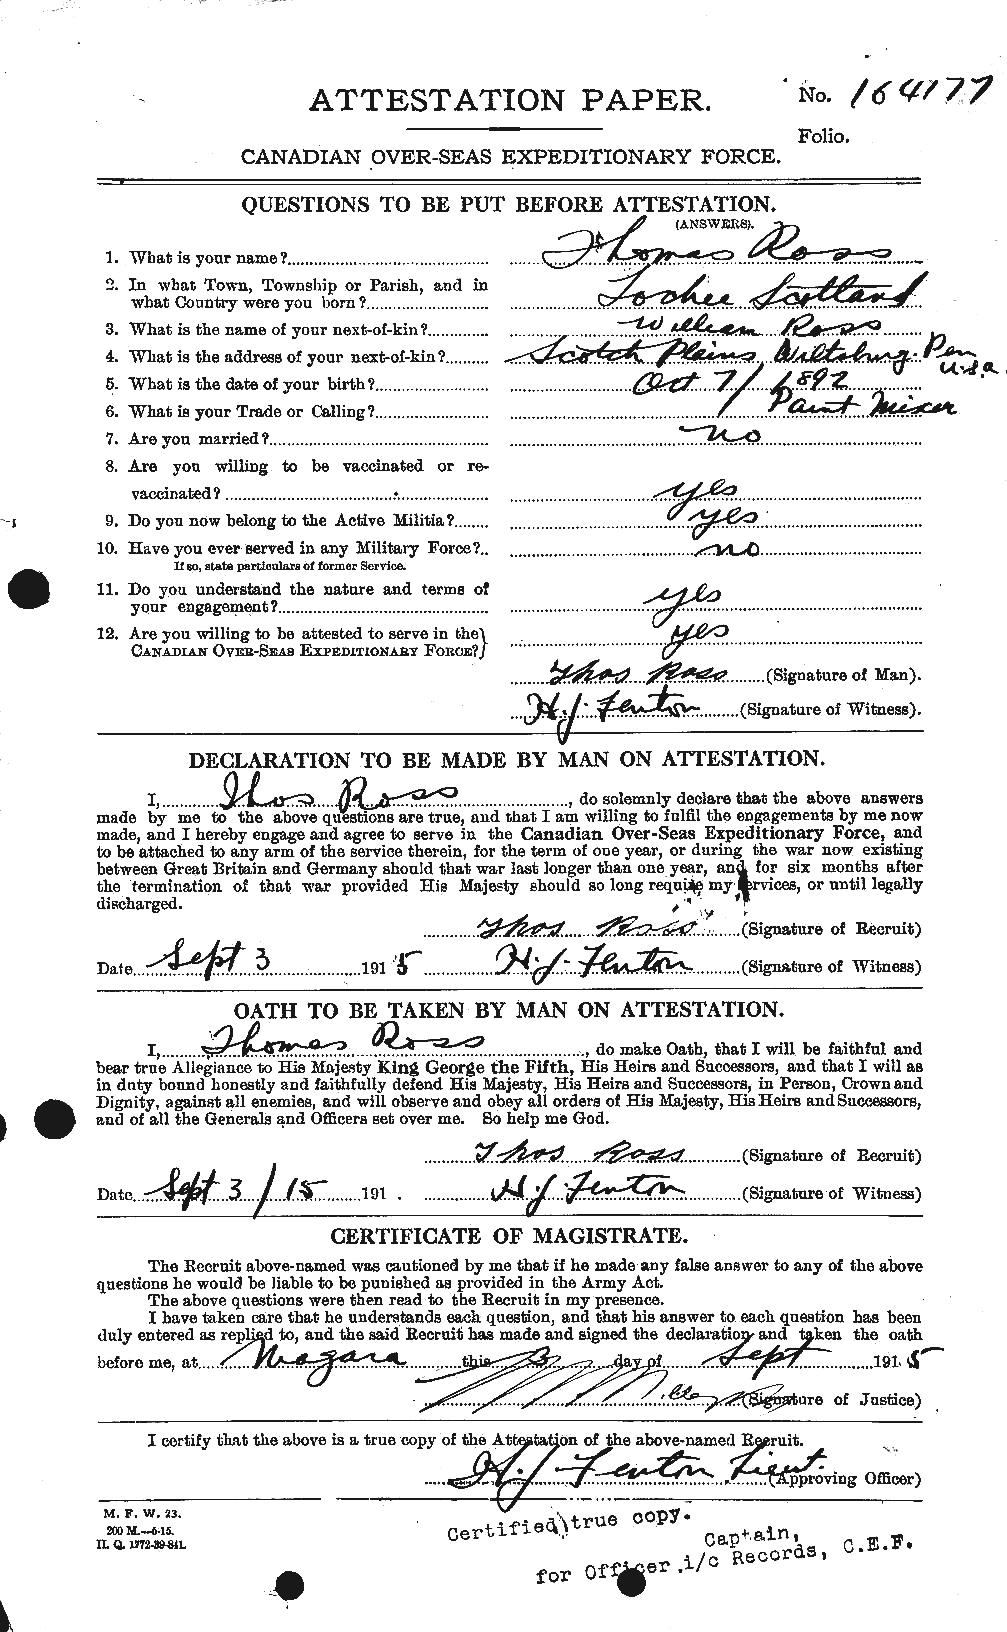 Personnel Records of the First World War - CEF 614041a